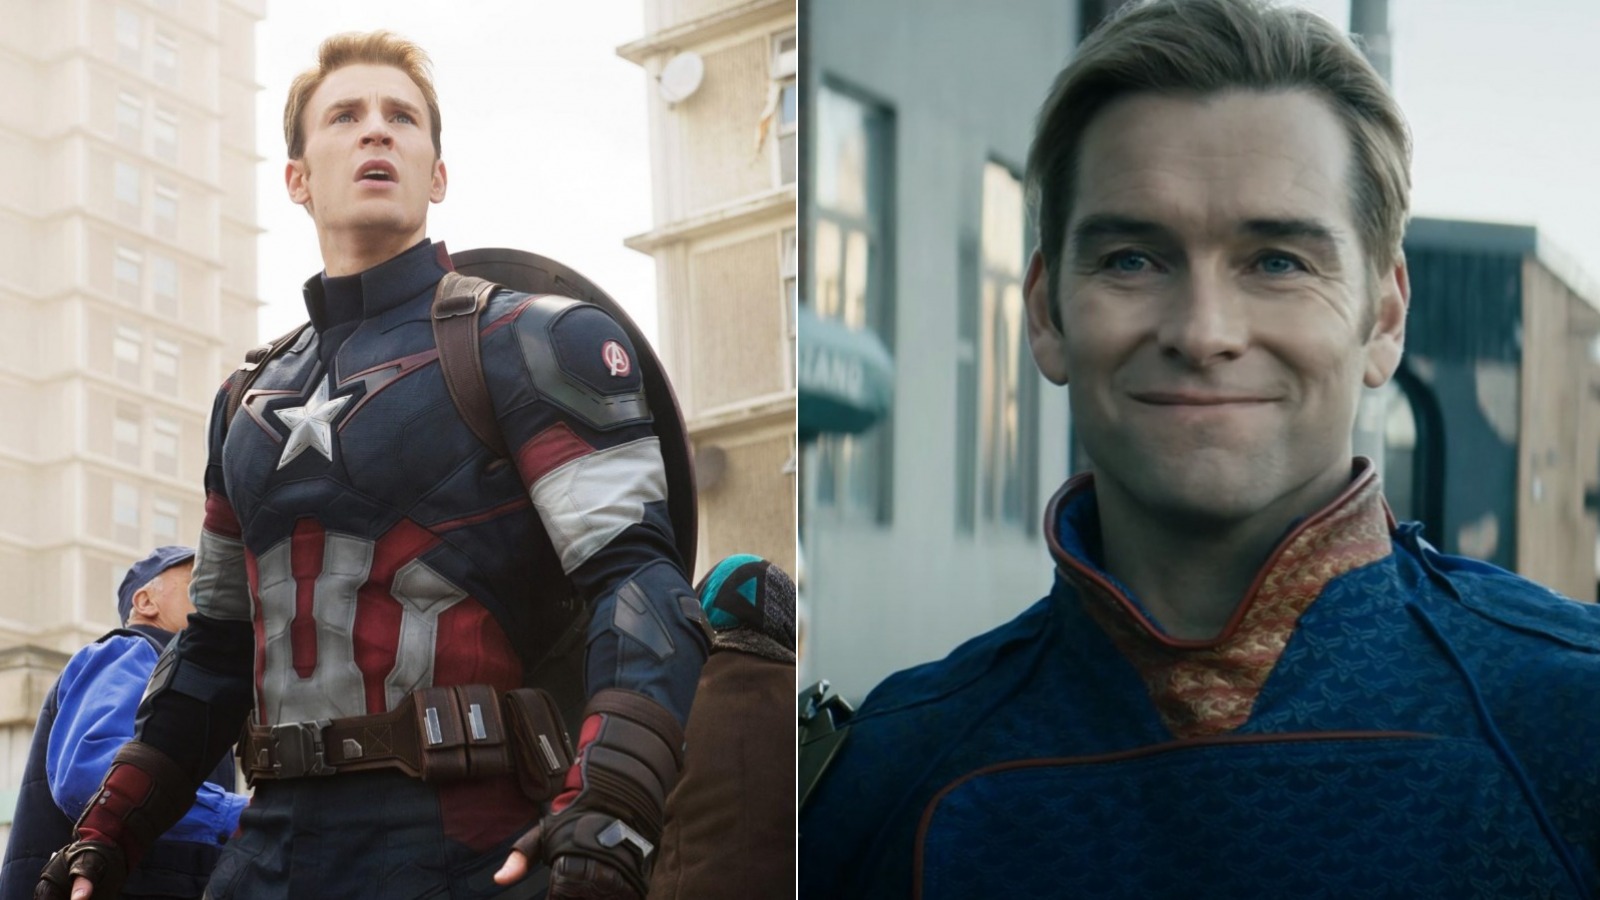 The MCU's Captain America and The Boys' Homelander both come with...